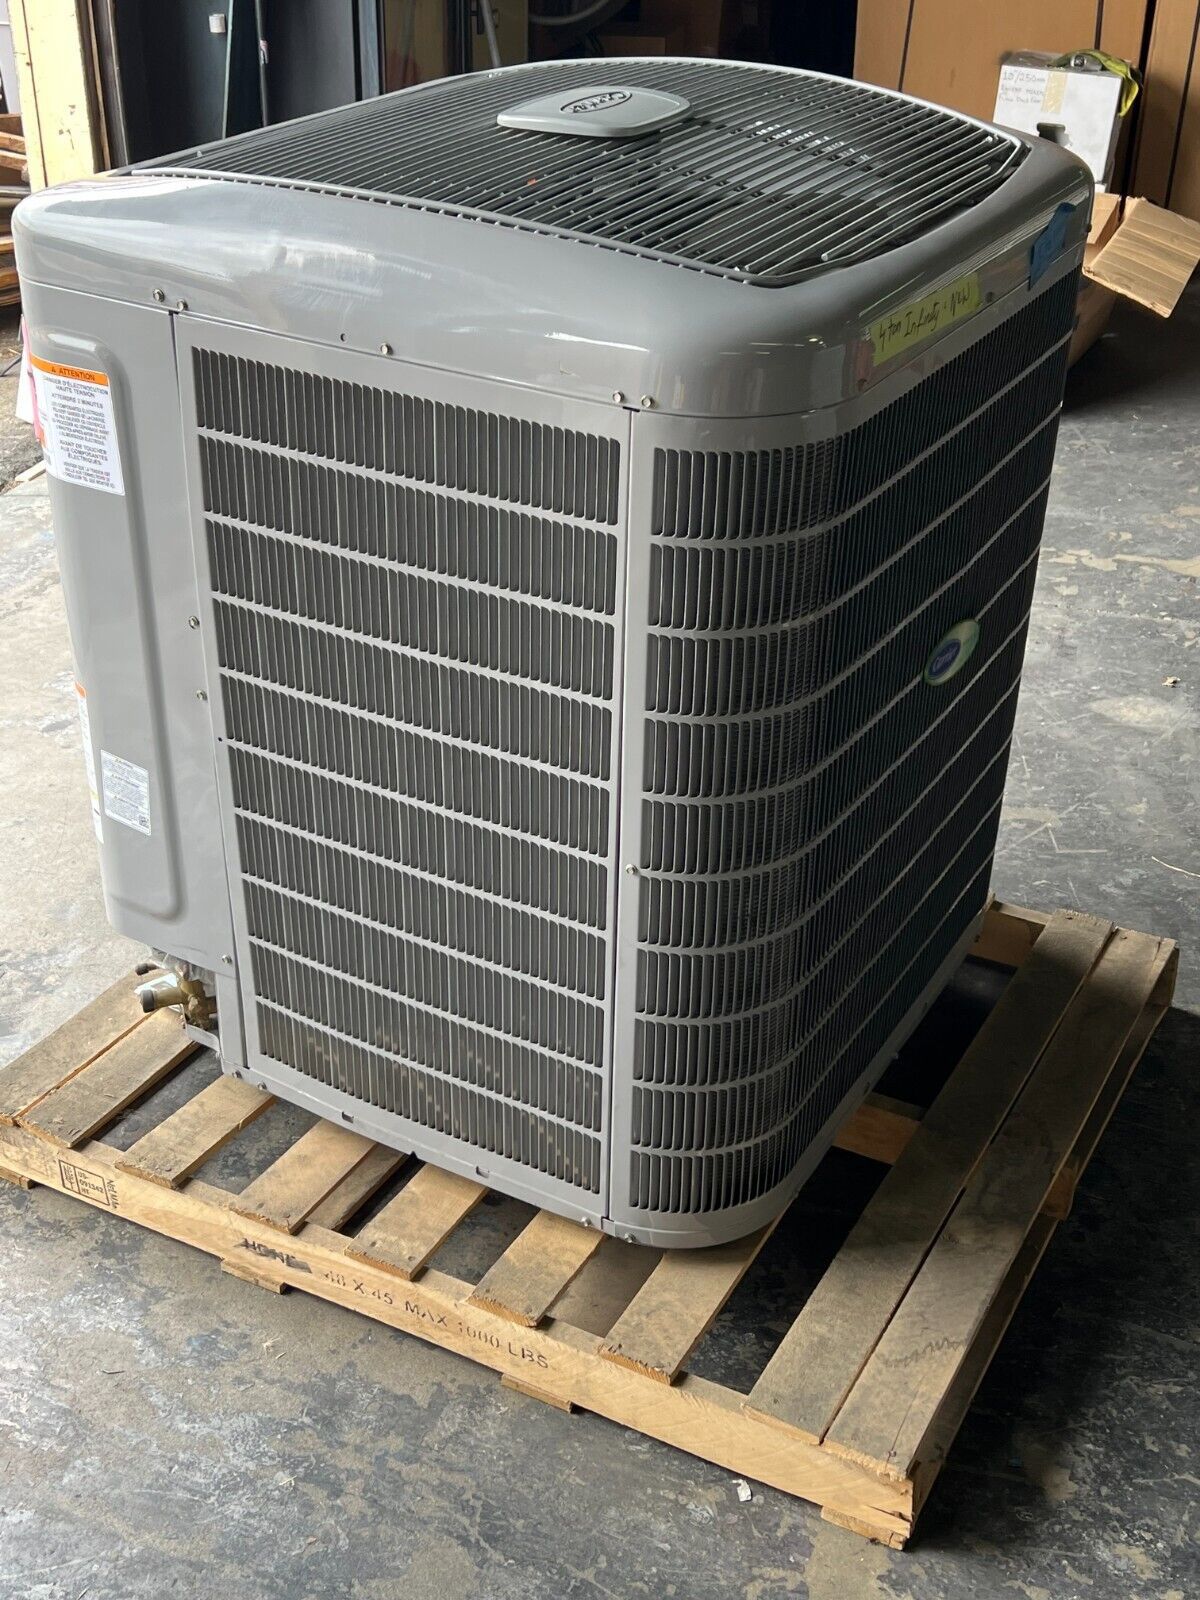 AC UNITS INSTALLED! FINANCING AVAILABLE!